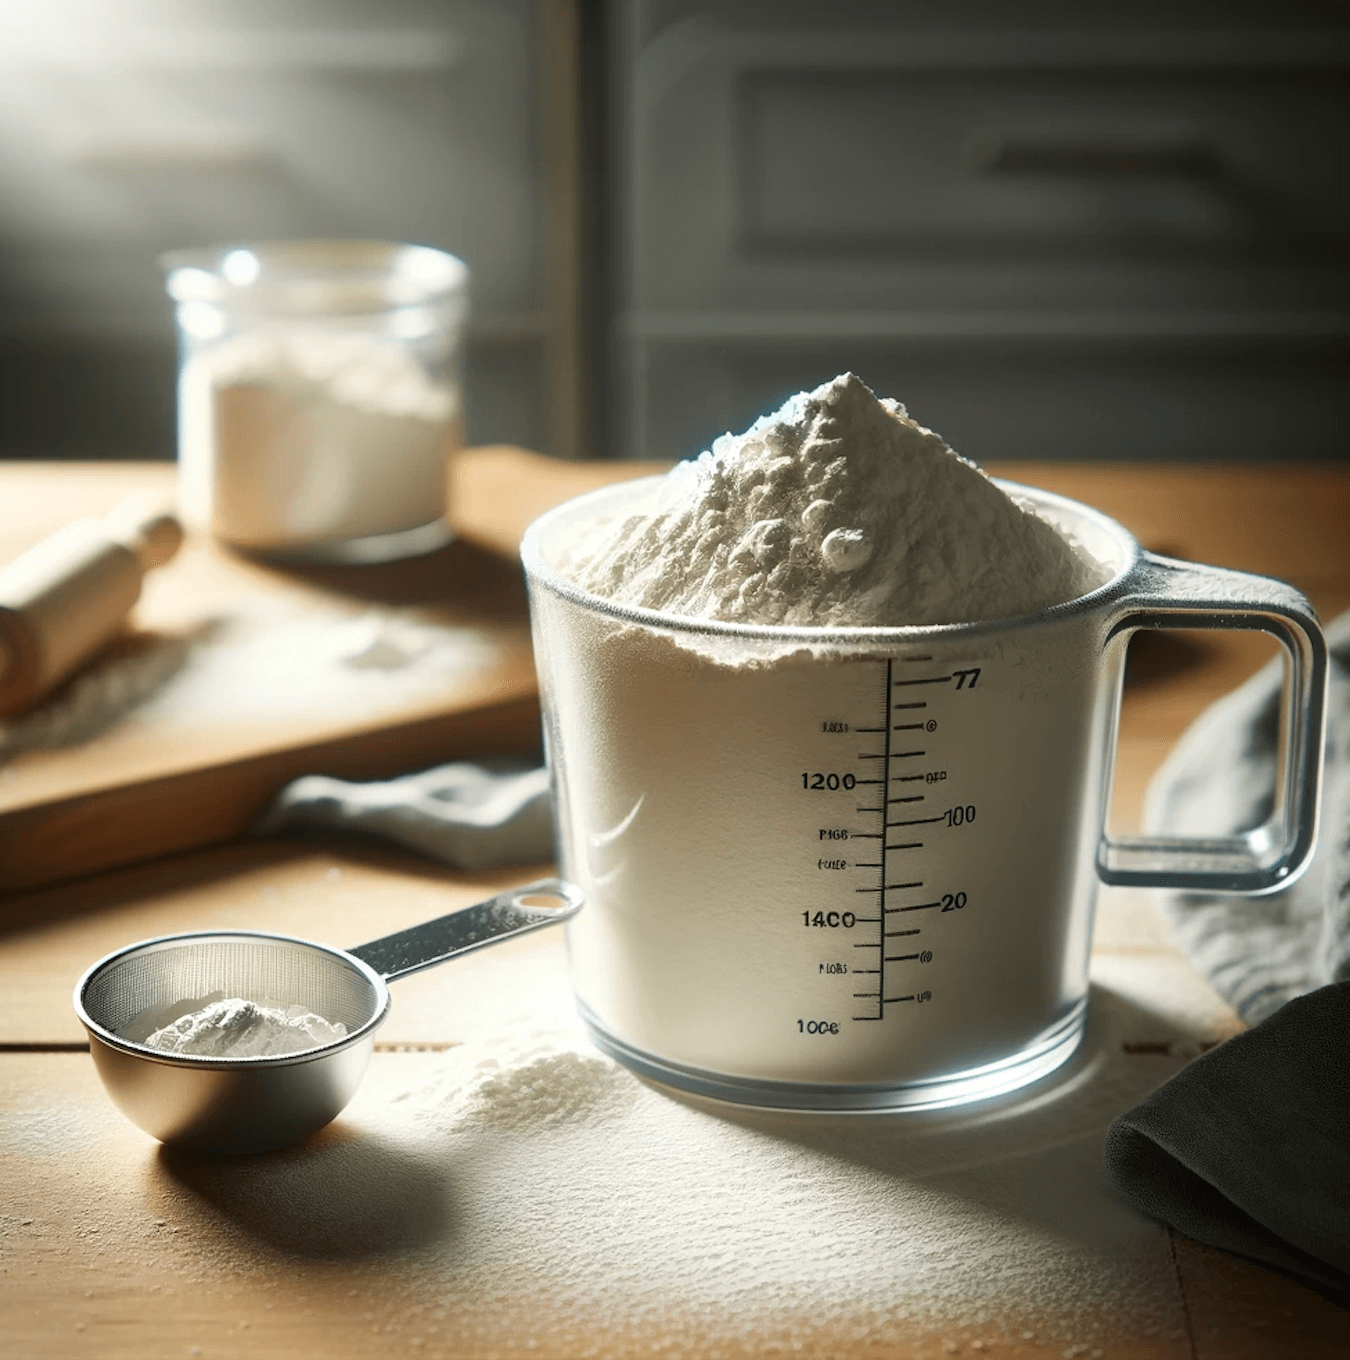 300 grams of flour in cups